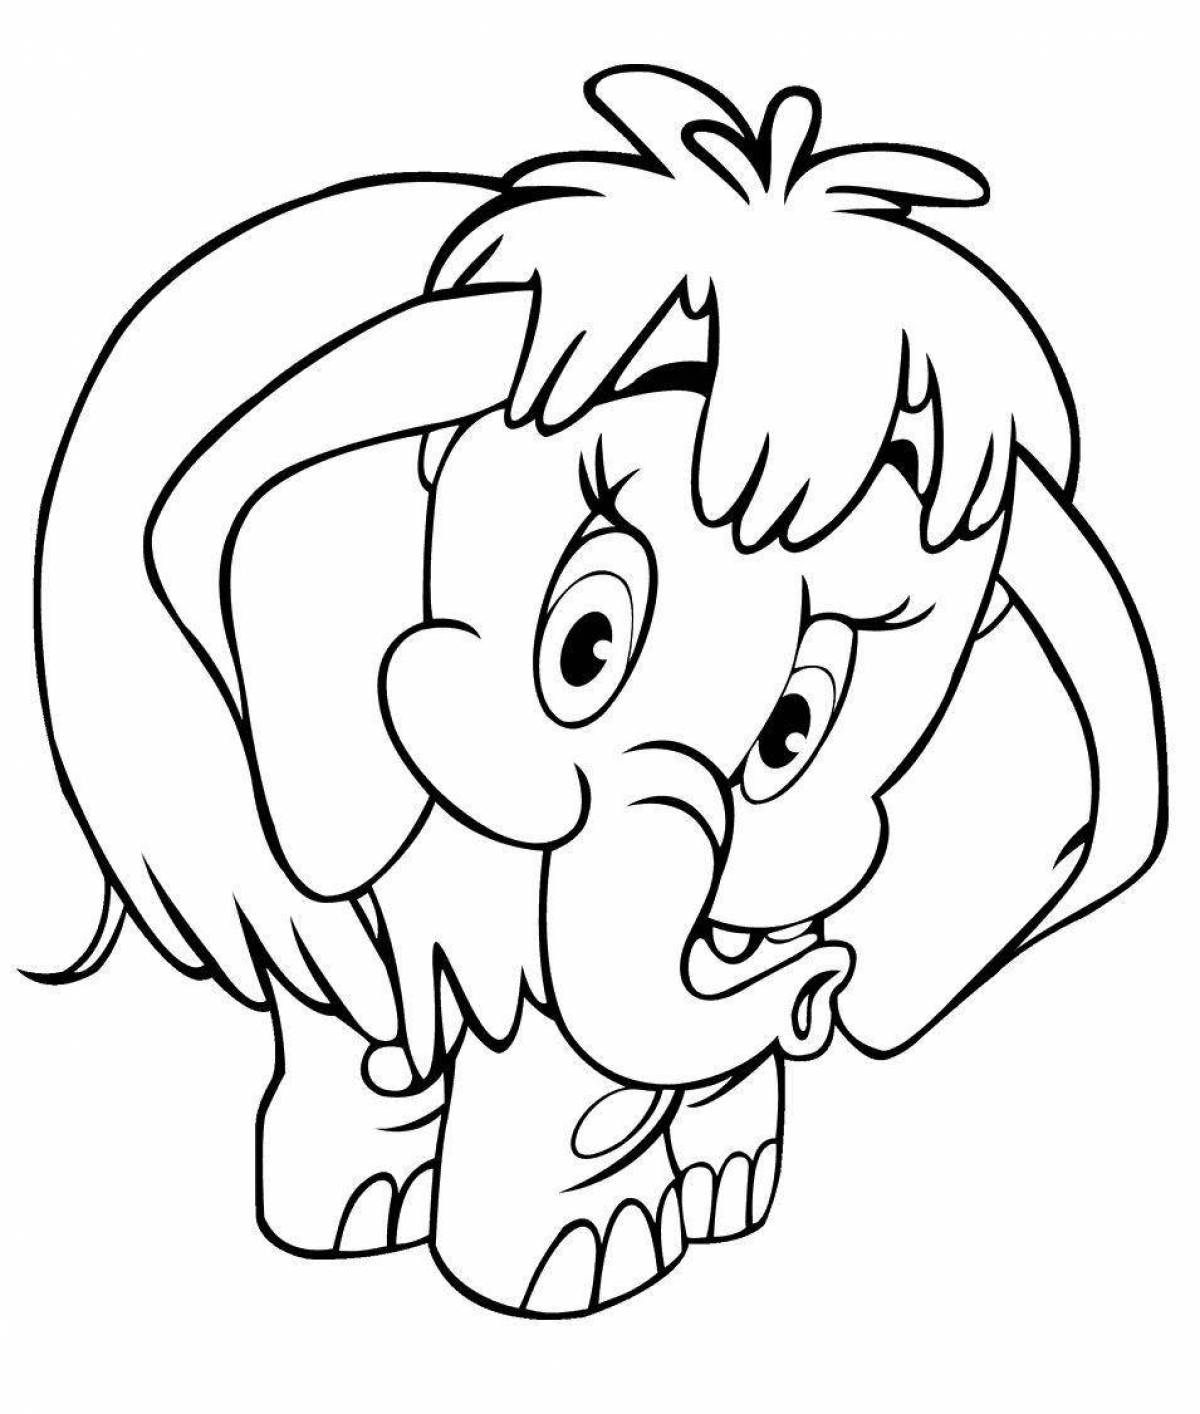 Great mammoth coloring page